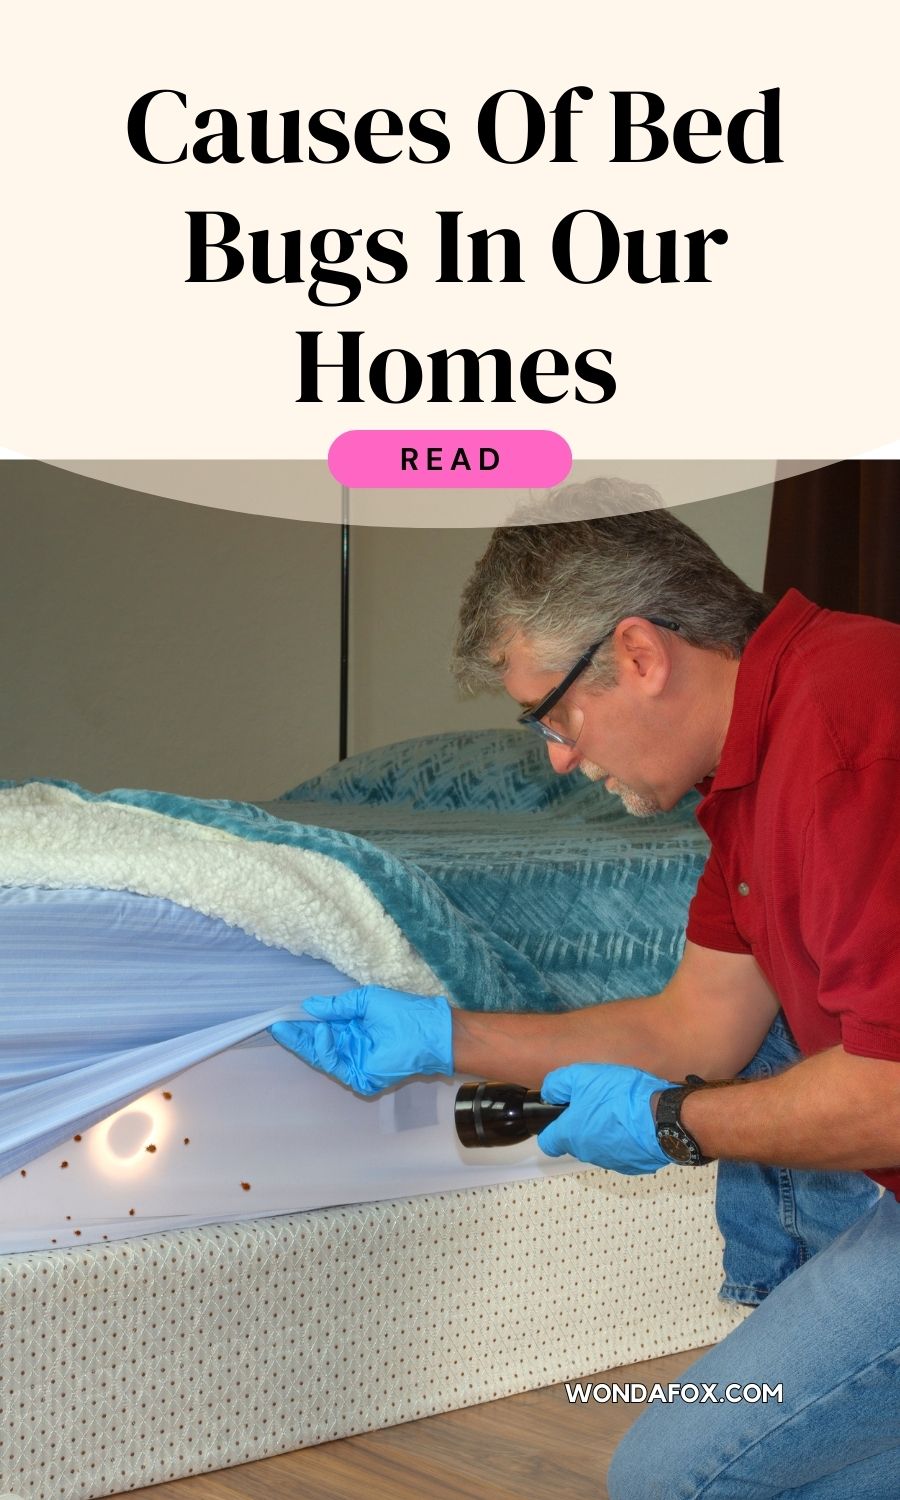 Causes of bed bugs in our homes